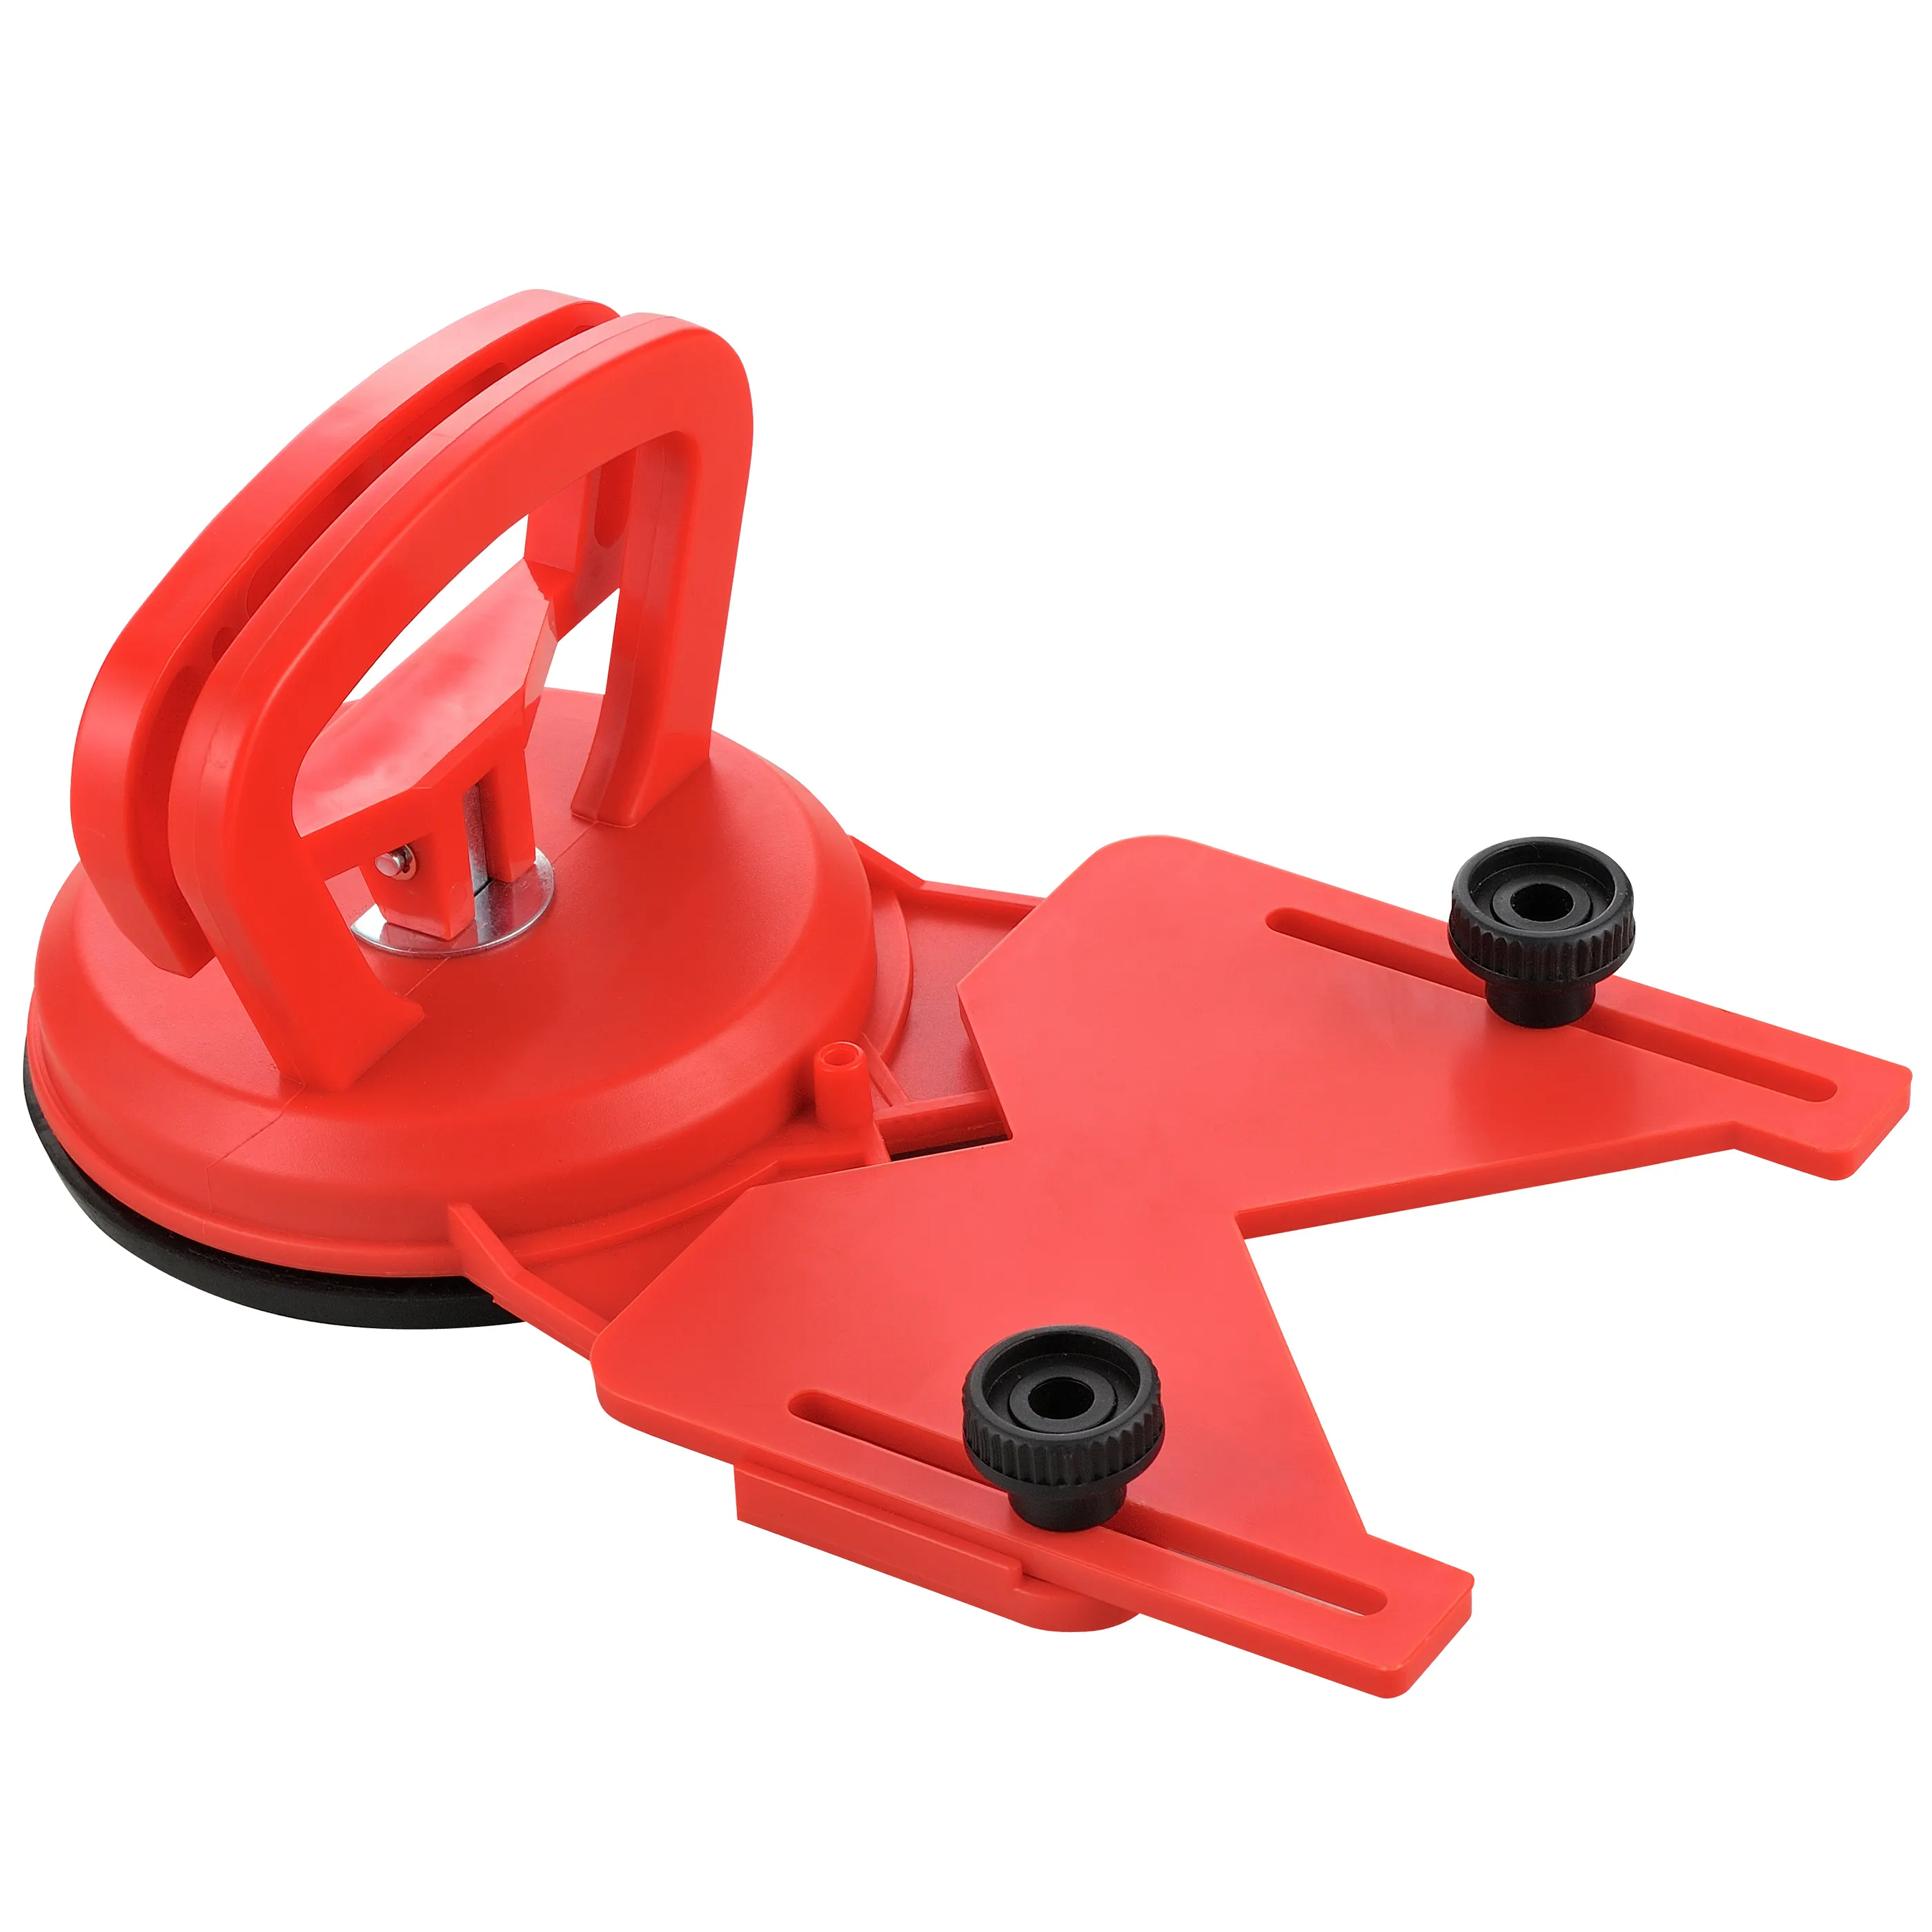 Sample available adjustable 60mm diameter 5KG heavy duty suction cup EVA pad drill guide